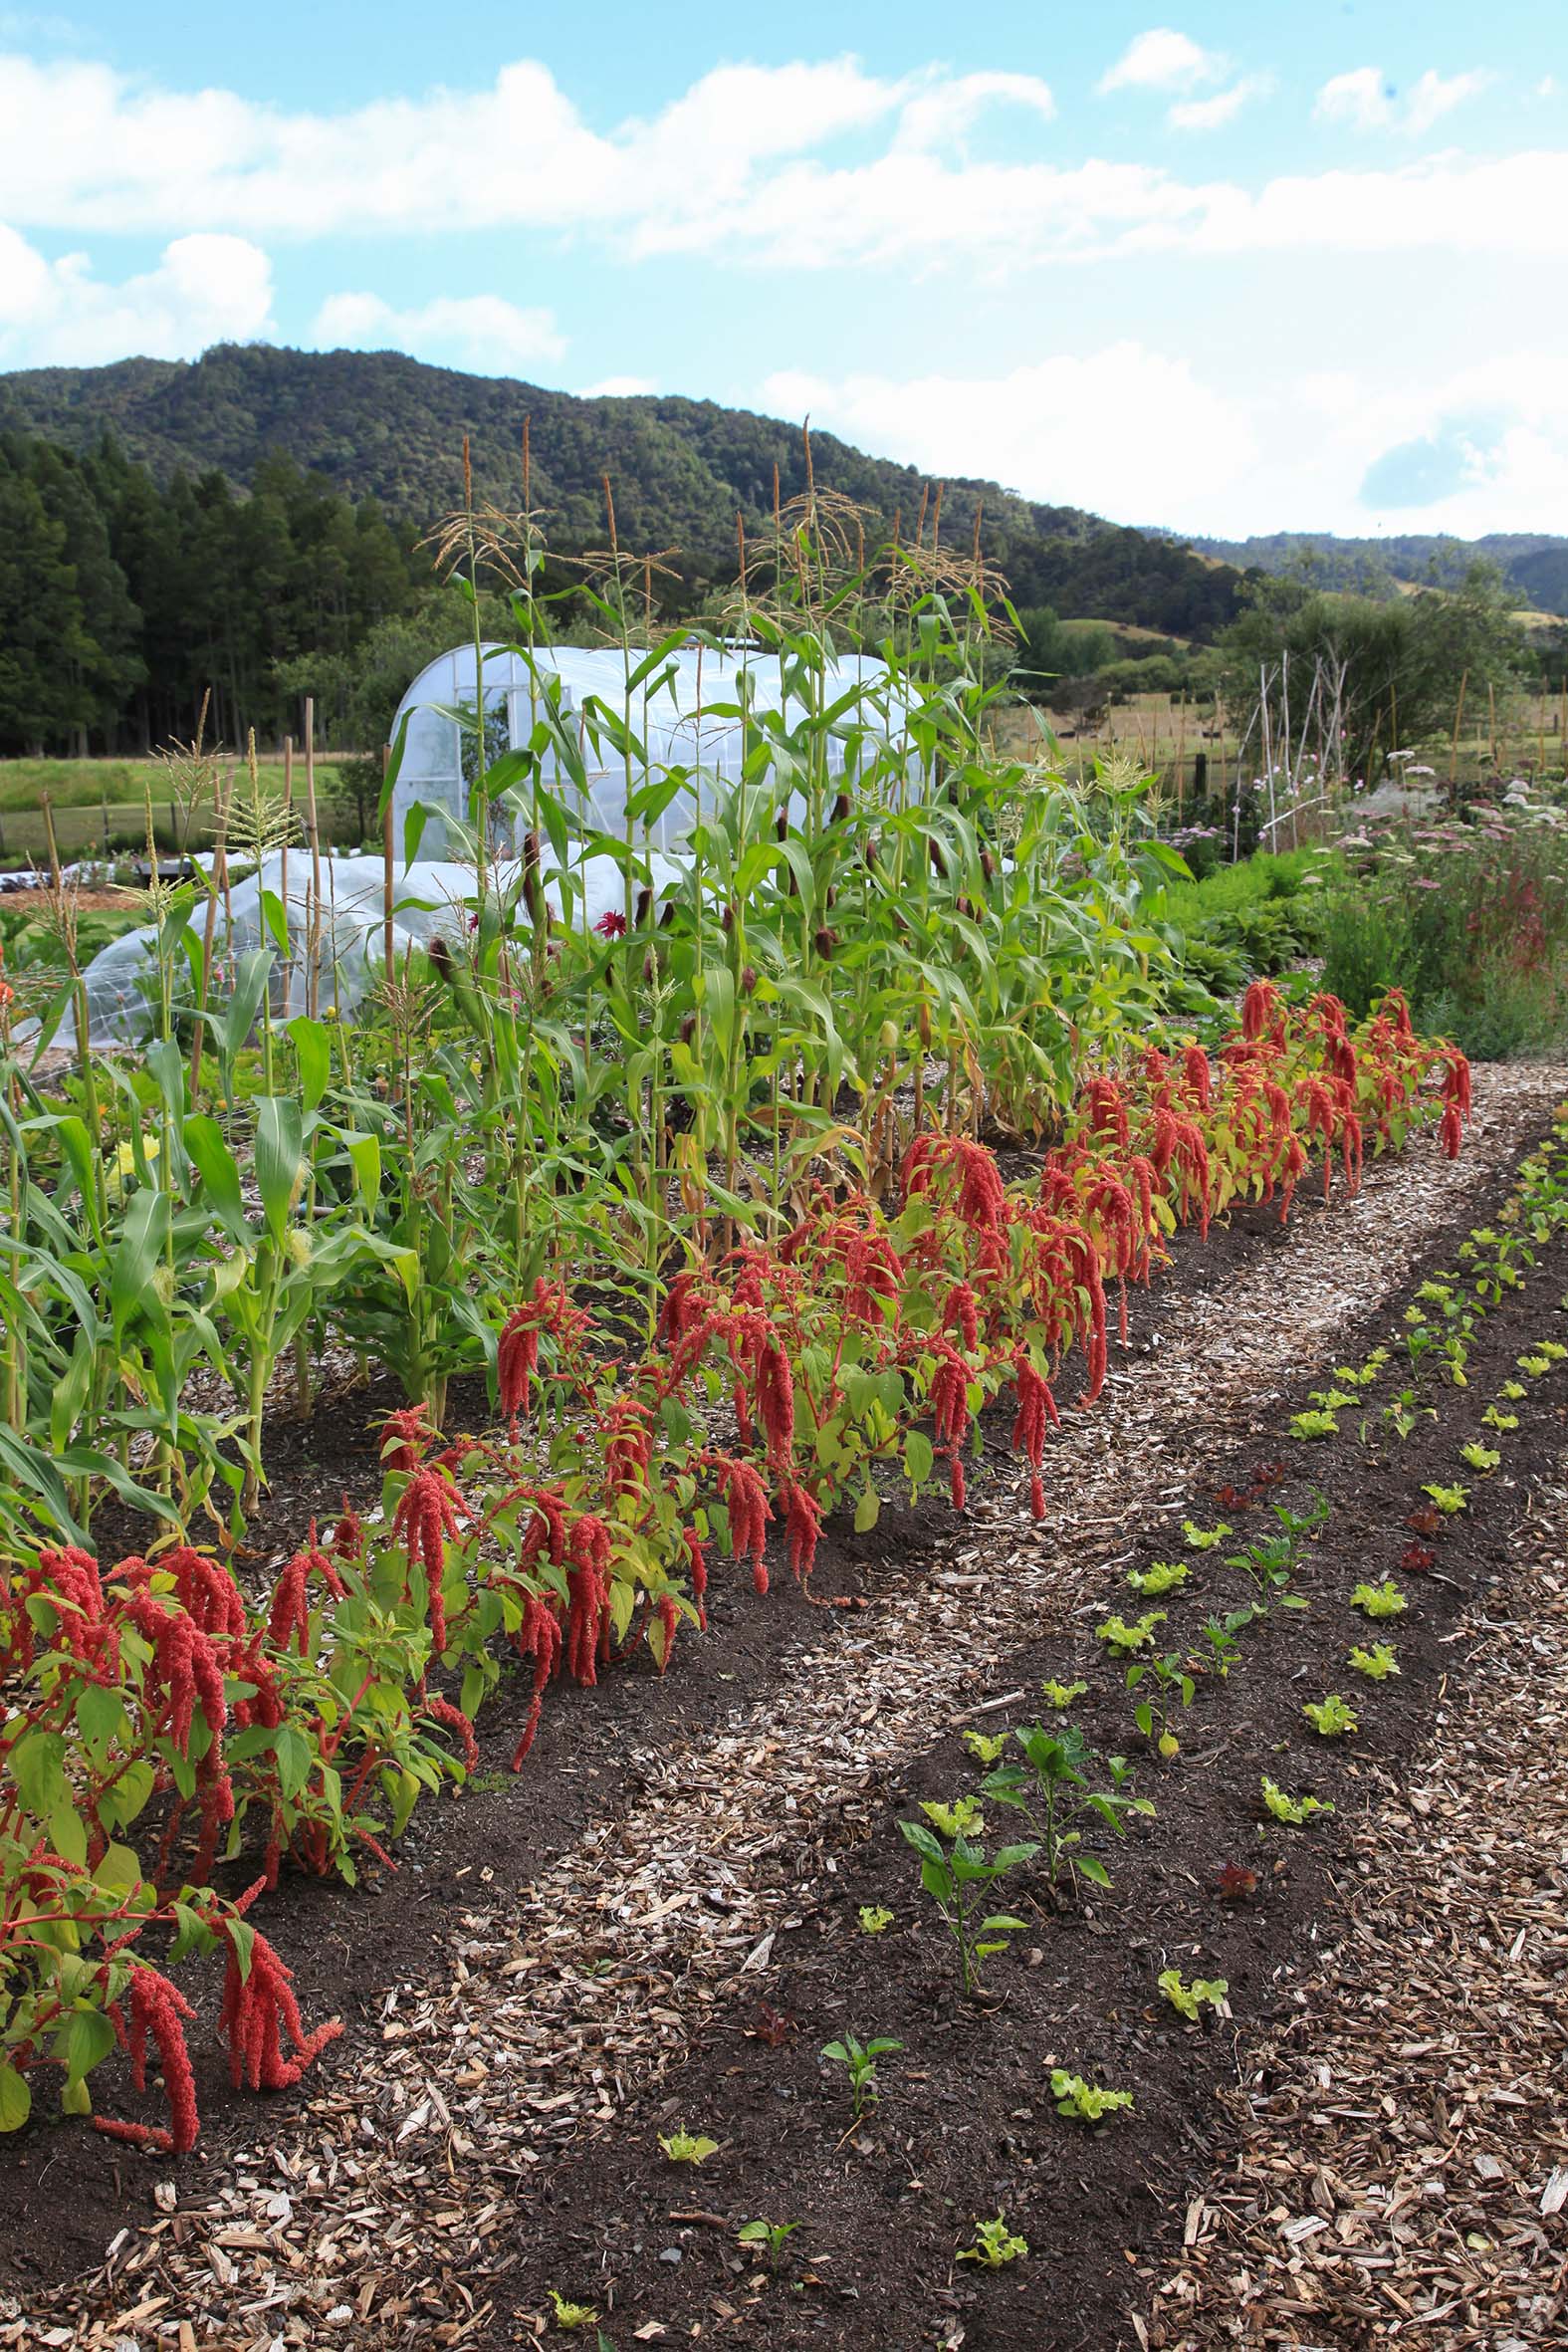 Rows of sweetcorn, flowers and lettuce growing in the garden